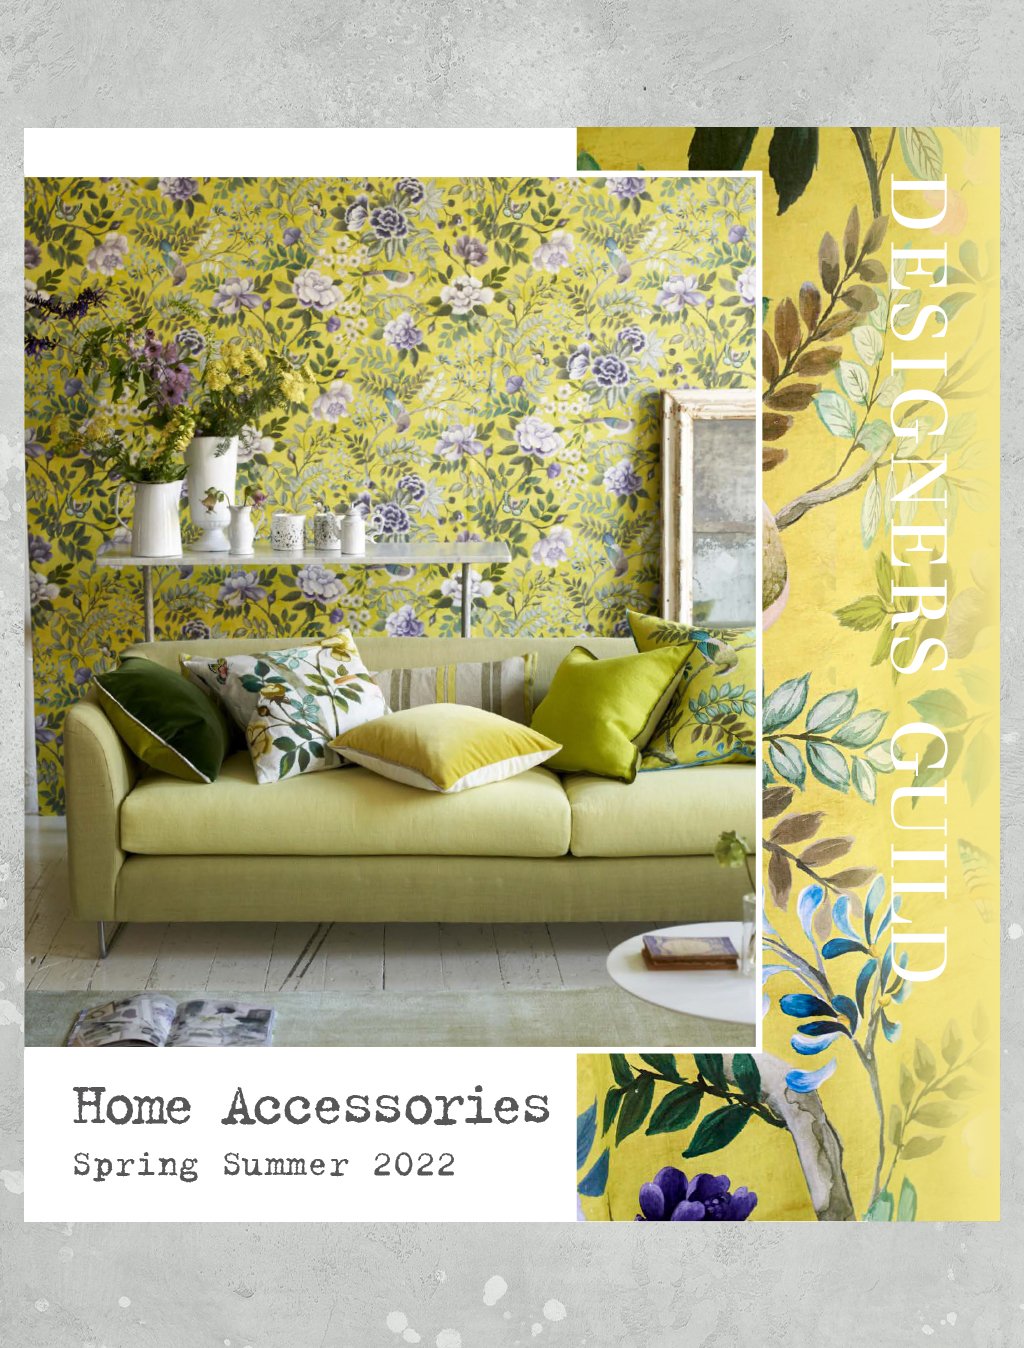 DESIGNERS GUILD HOME ACCESSORIES SPRING/SUMMER 2022 2021